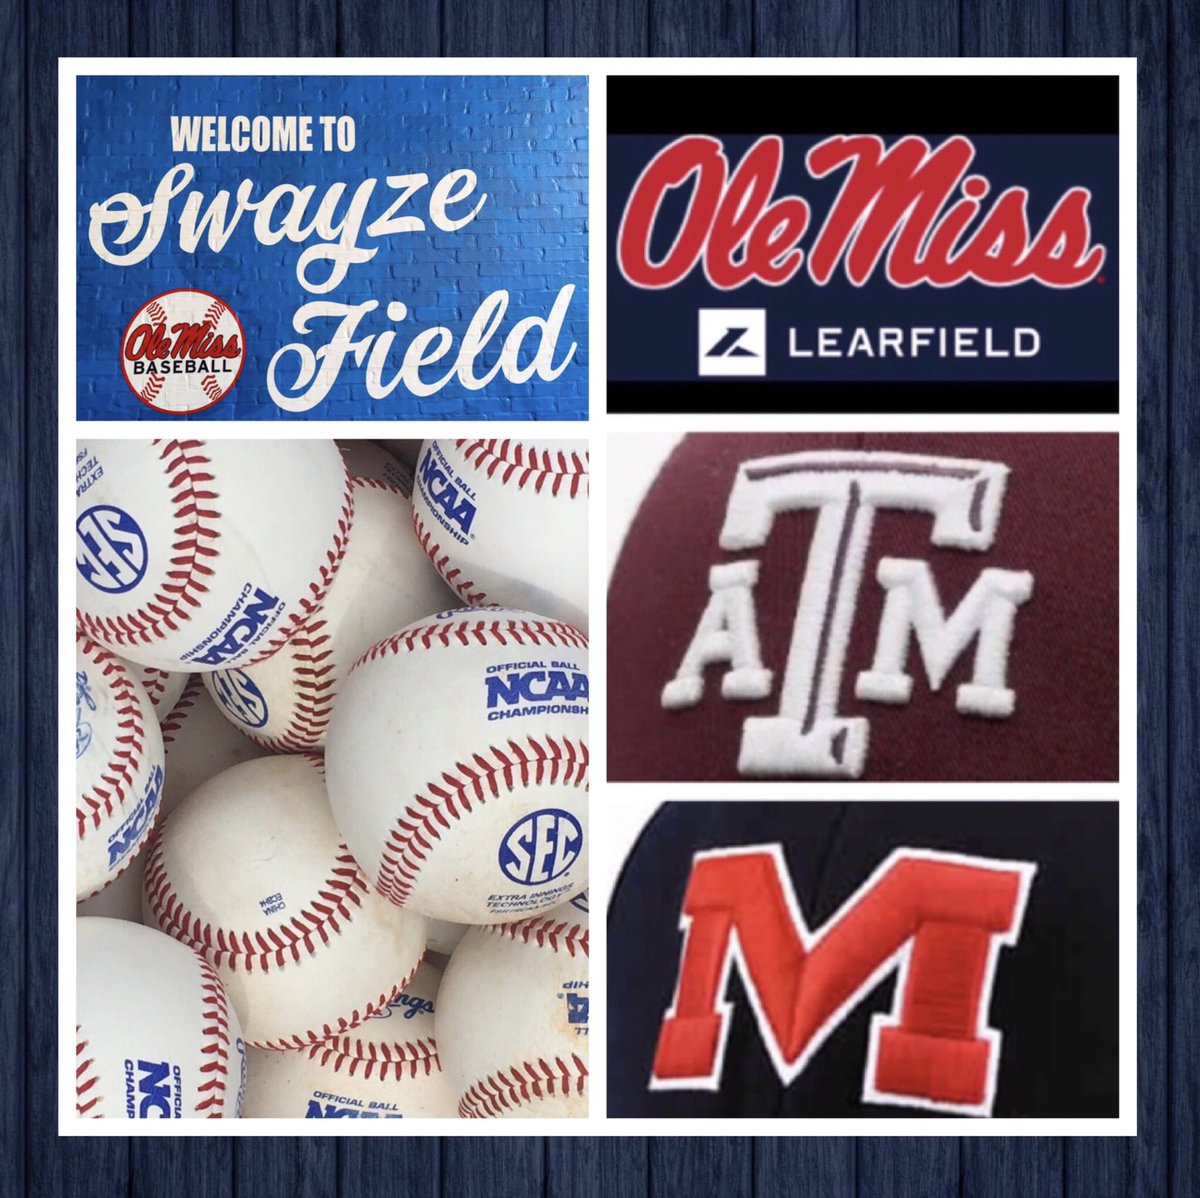 This afternoon @OleMissBSB hosts TXAM in game two of the final home SEC series. 1st pitch is 4pm & airtime on the @OleMissNetwork is 3:30pm w/@RebVoice & @HenduReb! Listen 🎧⬇️ 📻 Local radio olemisssports.com/sports/2018/7/… 📱 @OleMissSports app 💻 online olemisssports.com/watch?Live=992…